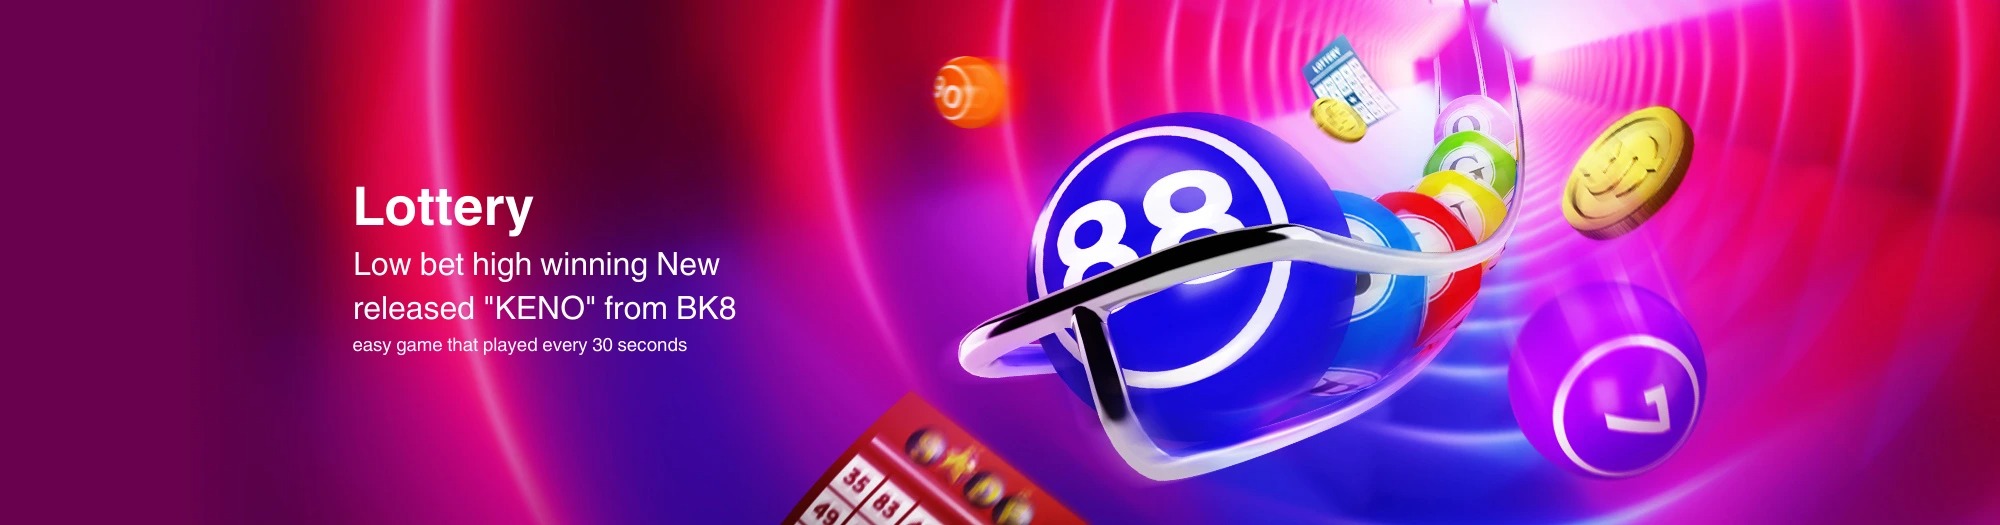 lottery-banner